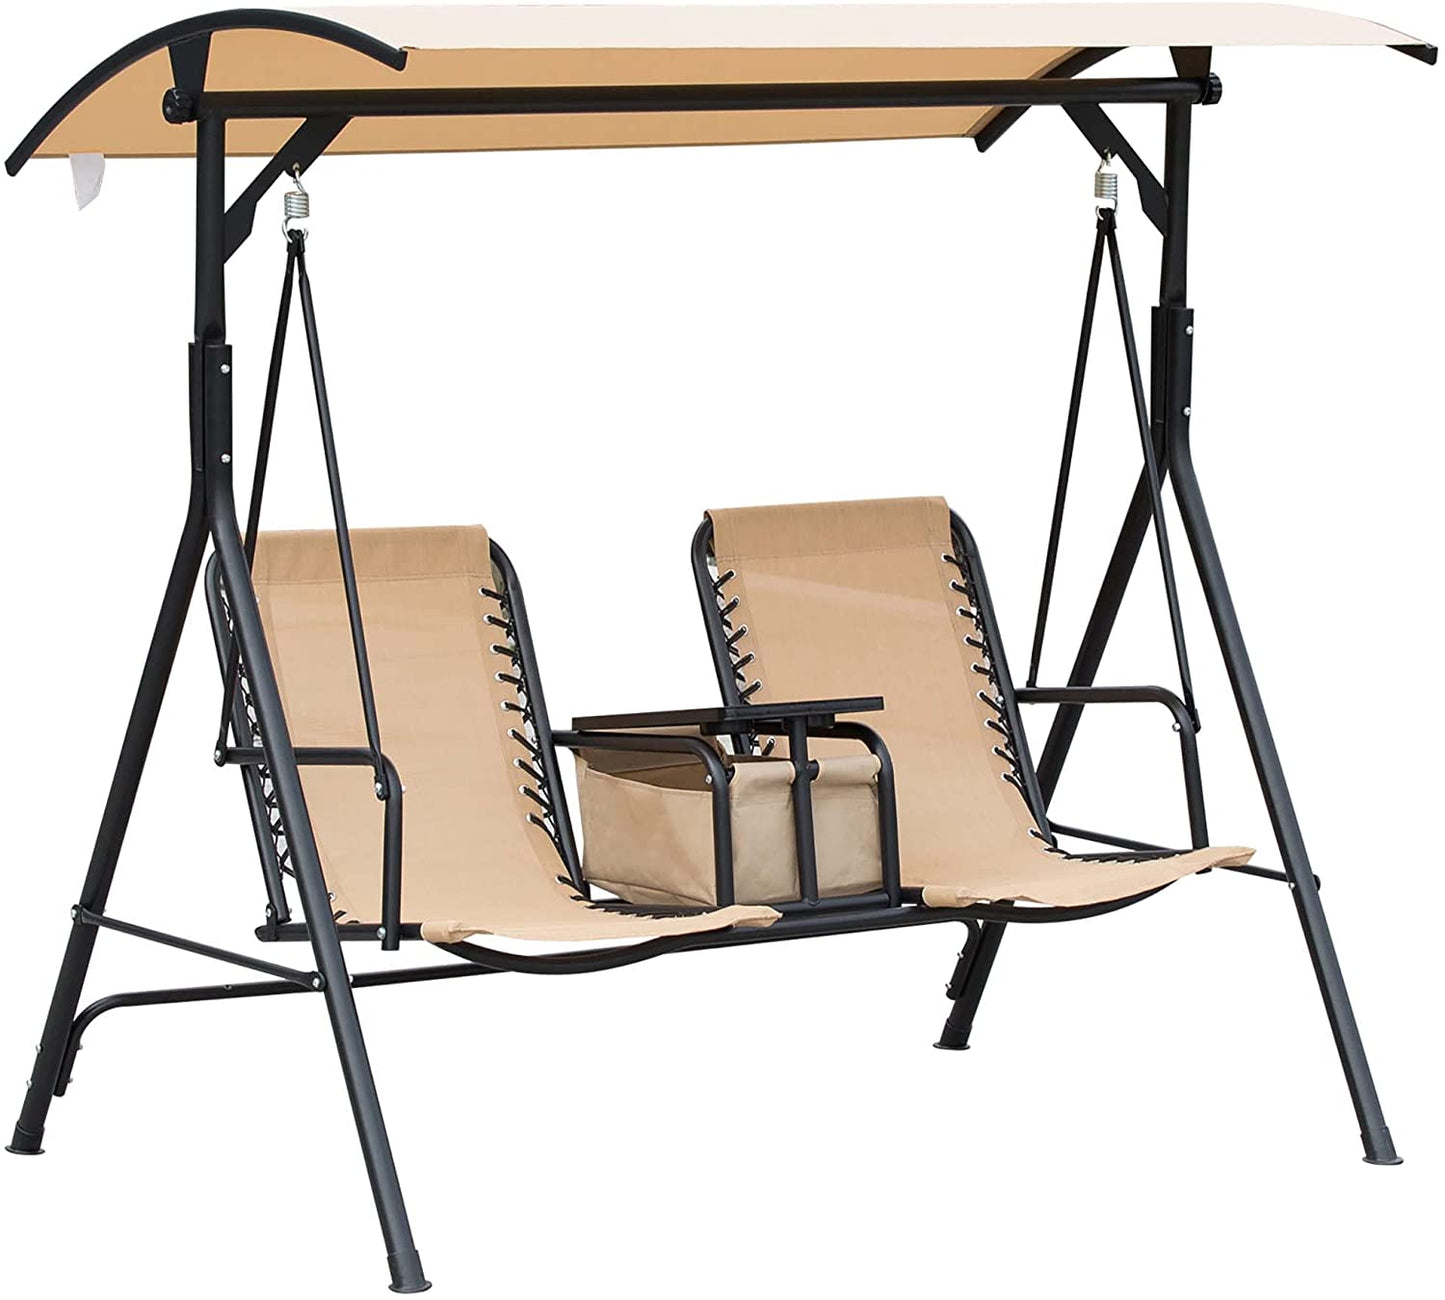 Outsunny 2-Seat Swing Chair Steel Frame Adjustable Canopy Sling Seats w/Middle Table